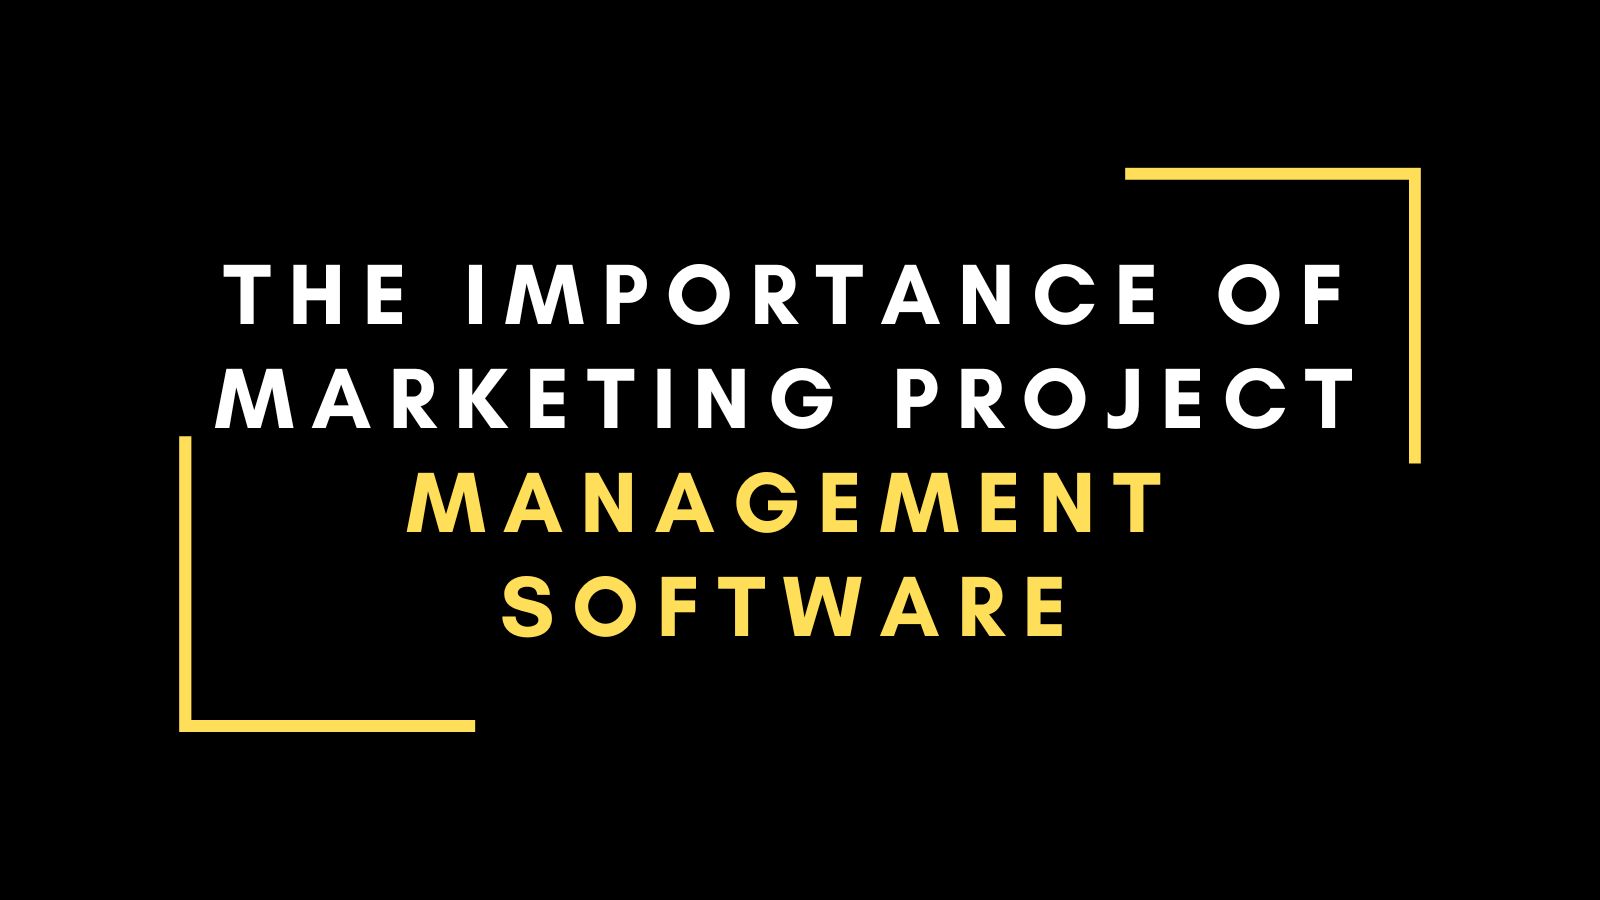 The Importance of Marketing Project Management Software